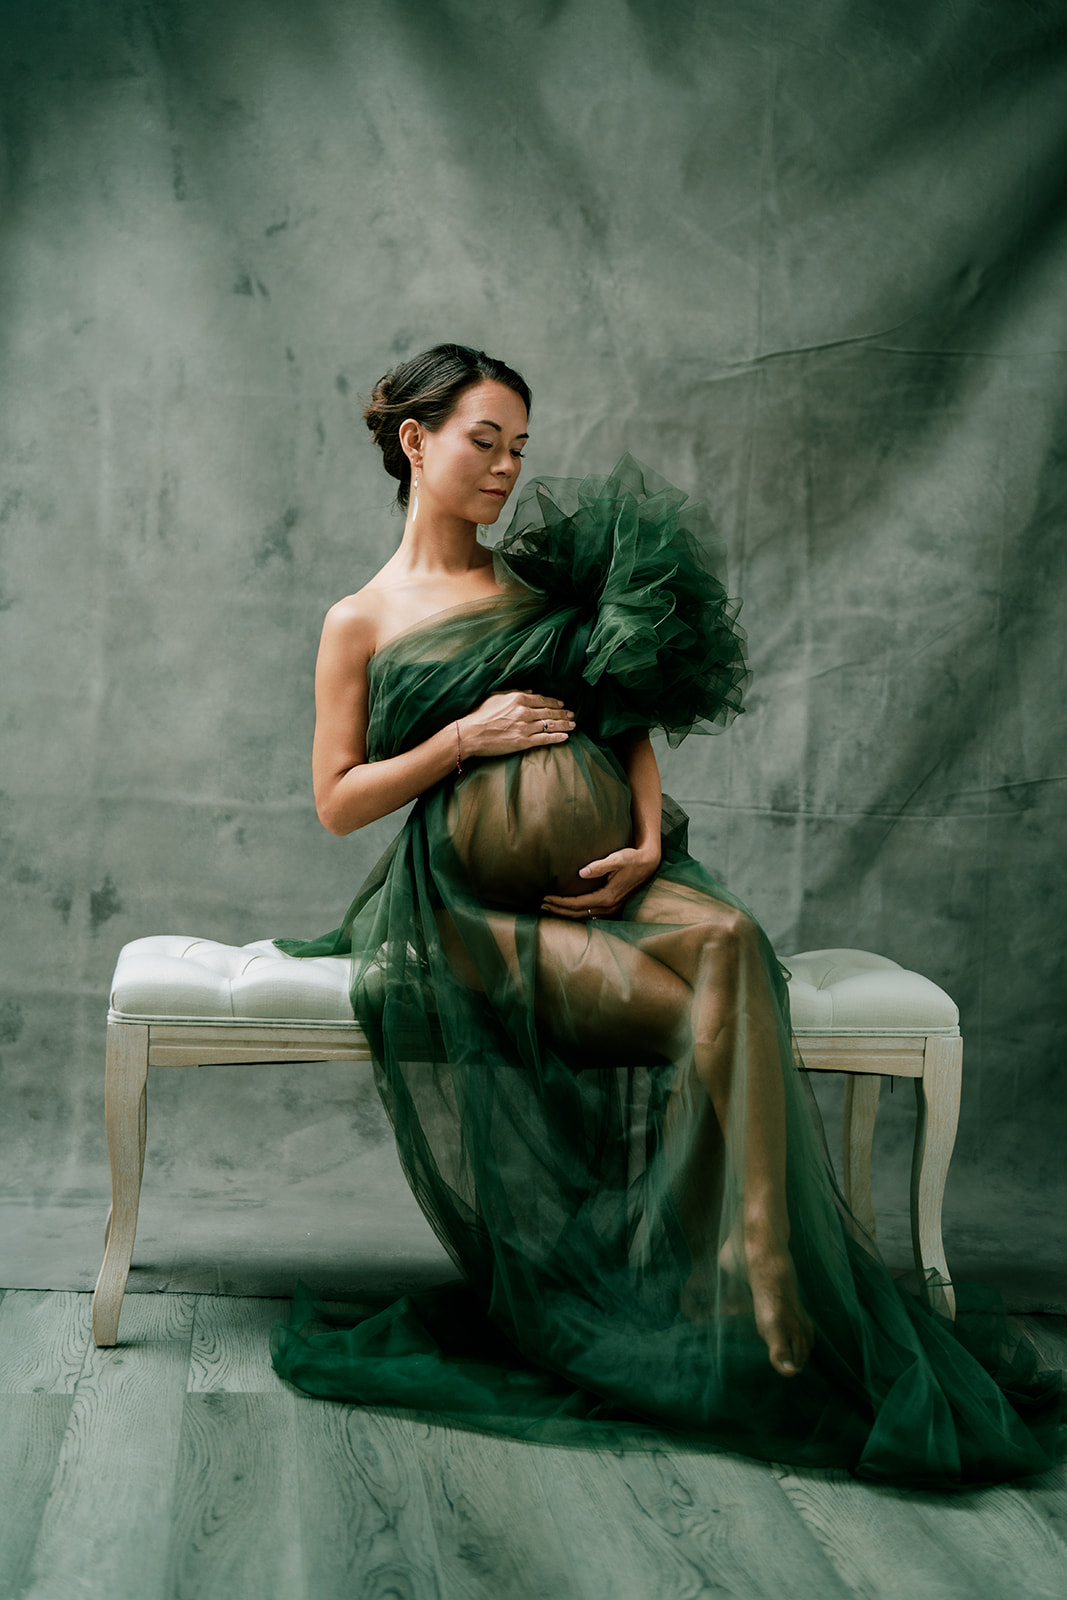 A pregnant woman in a green dress sitting on a bench during her studio maternity session.